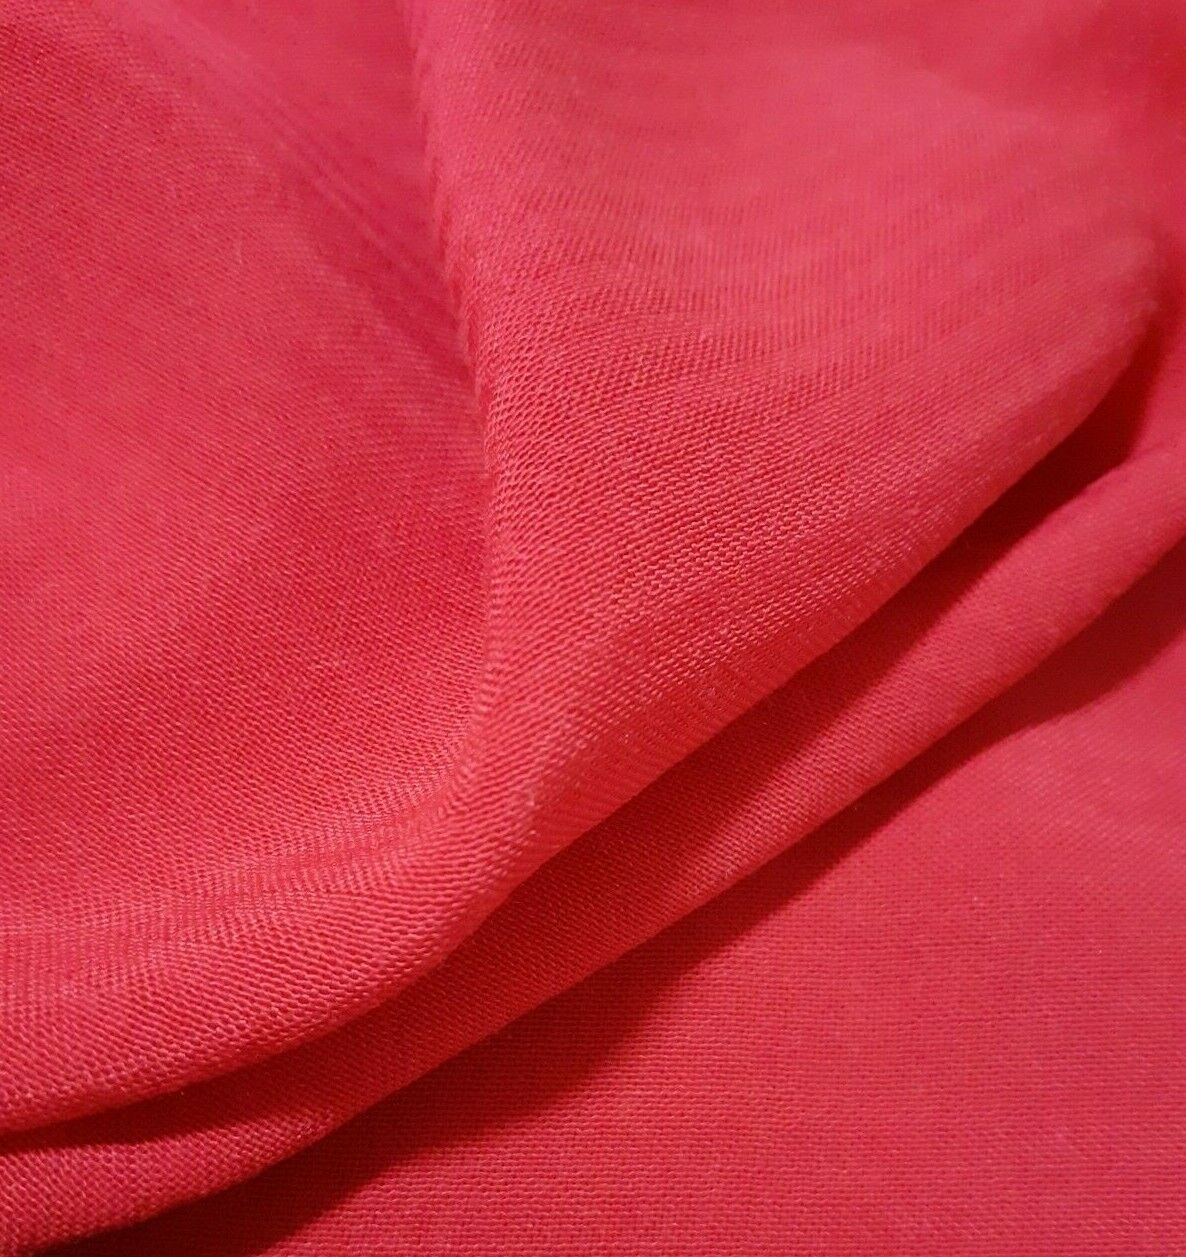 BROWN AND FUCHSIA COLOUR VISCOSE FABRIC - SOLD BY THE METRE